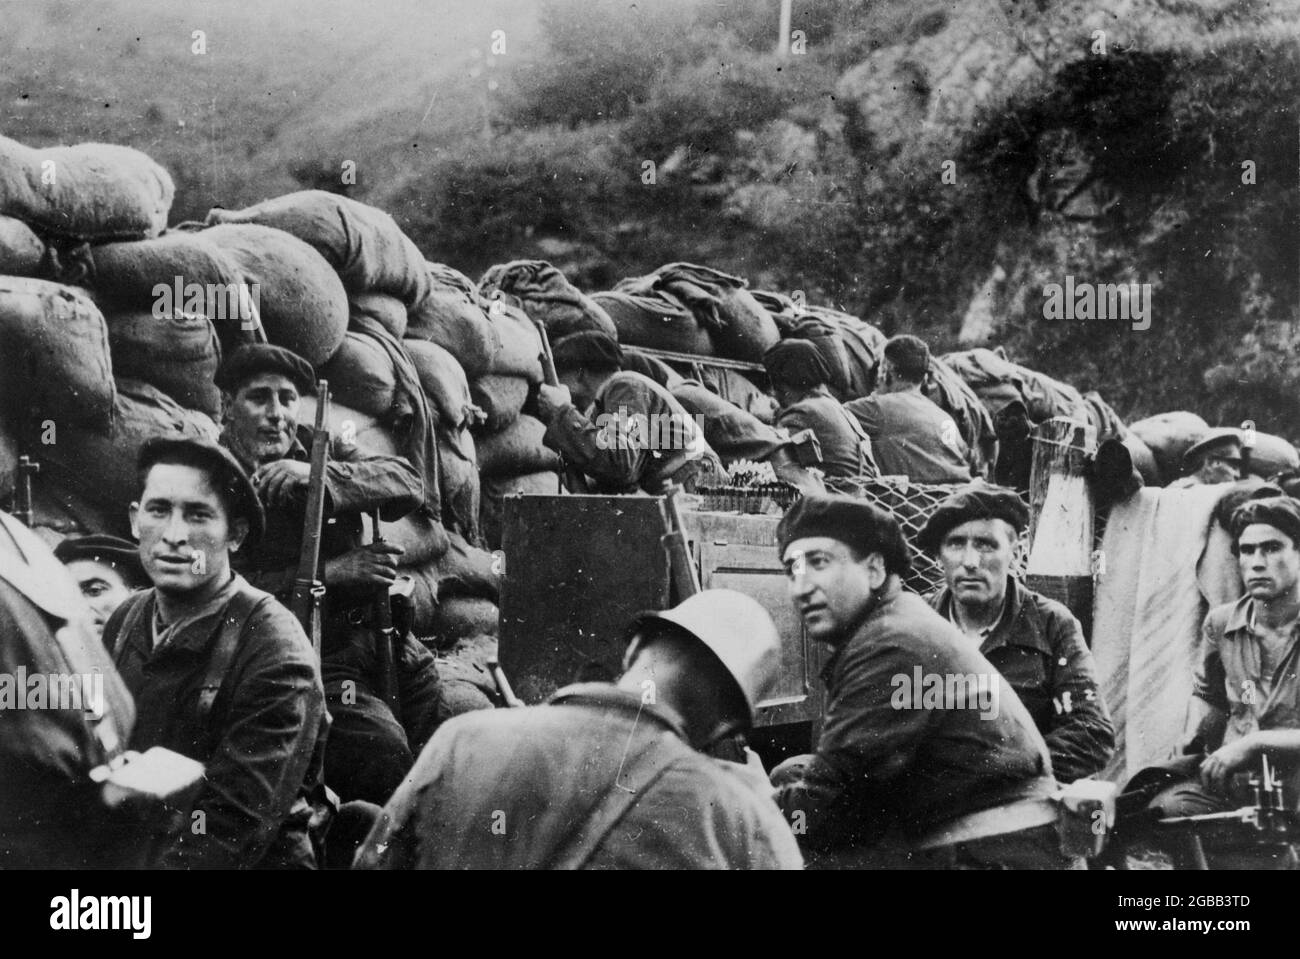 IRUN, SPAIN - 1936 - Republican soldiers and armed civilian volunteers (probably from the Basque Country and miners from Asturias) man a barricade dur Stock Photo